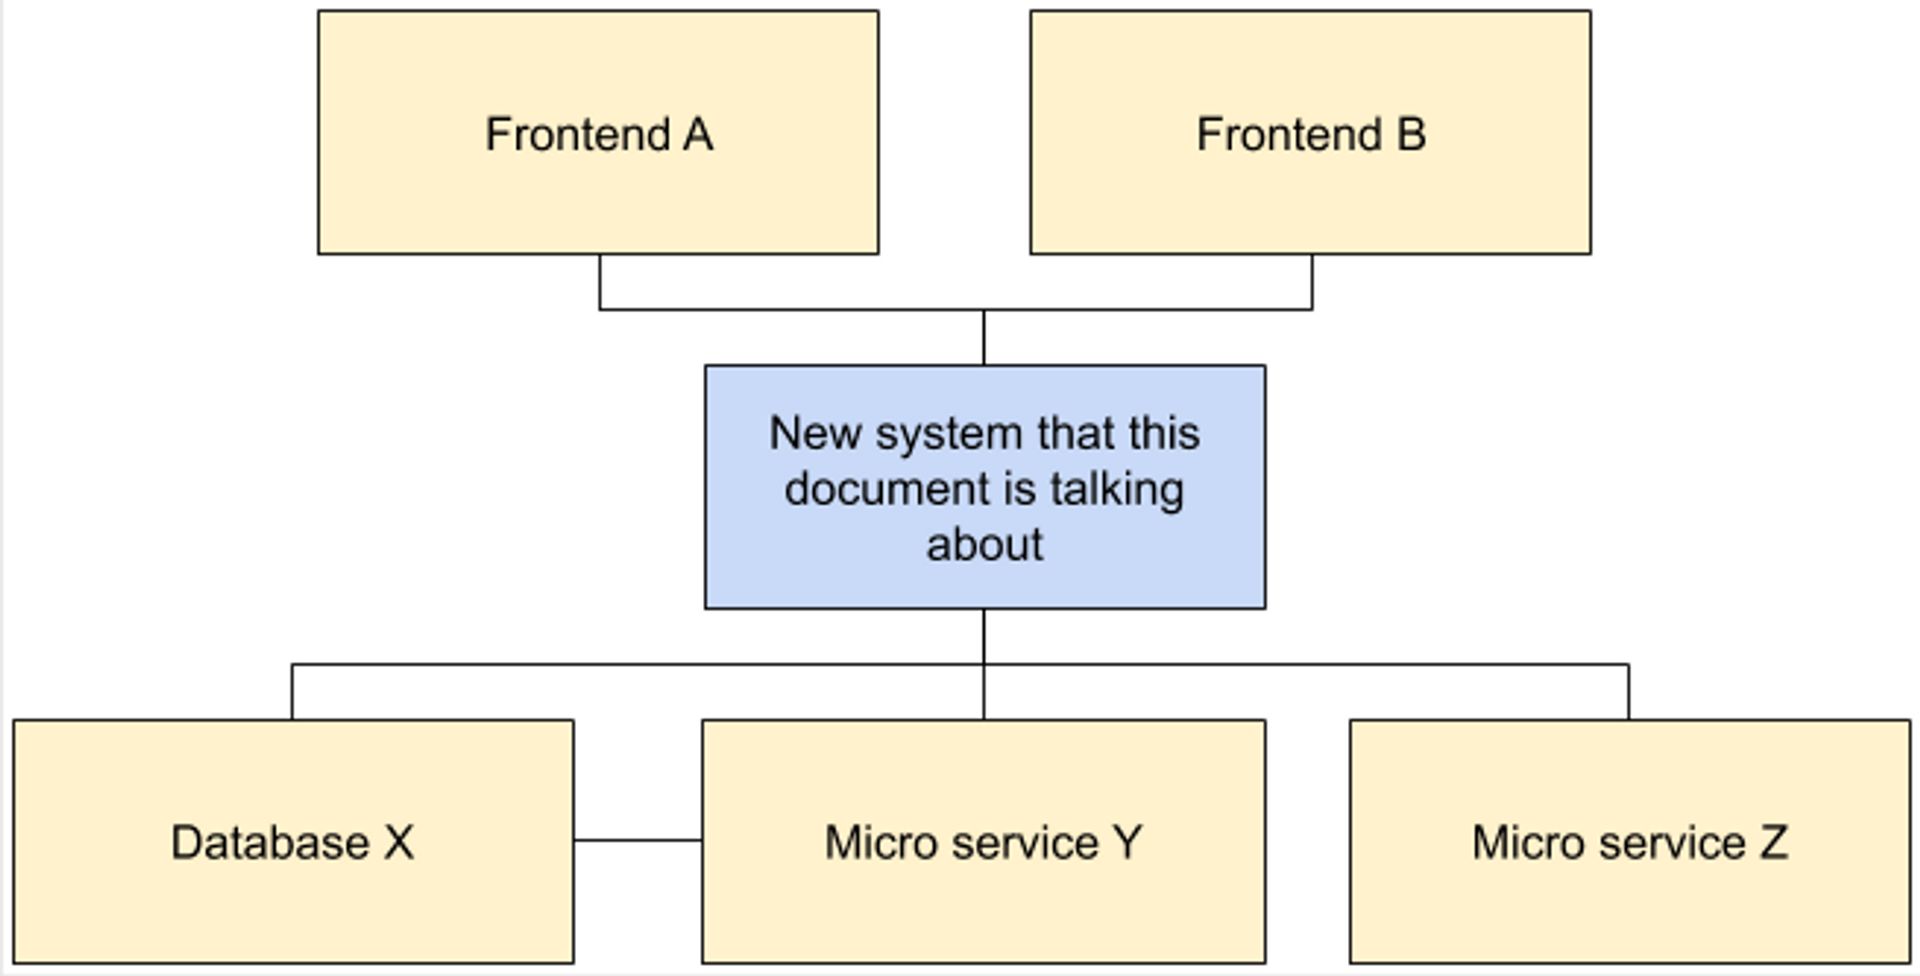 Block diagram showing how various systems are related to each other. The actual text is just examples and not needed to be seen to understand the example.